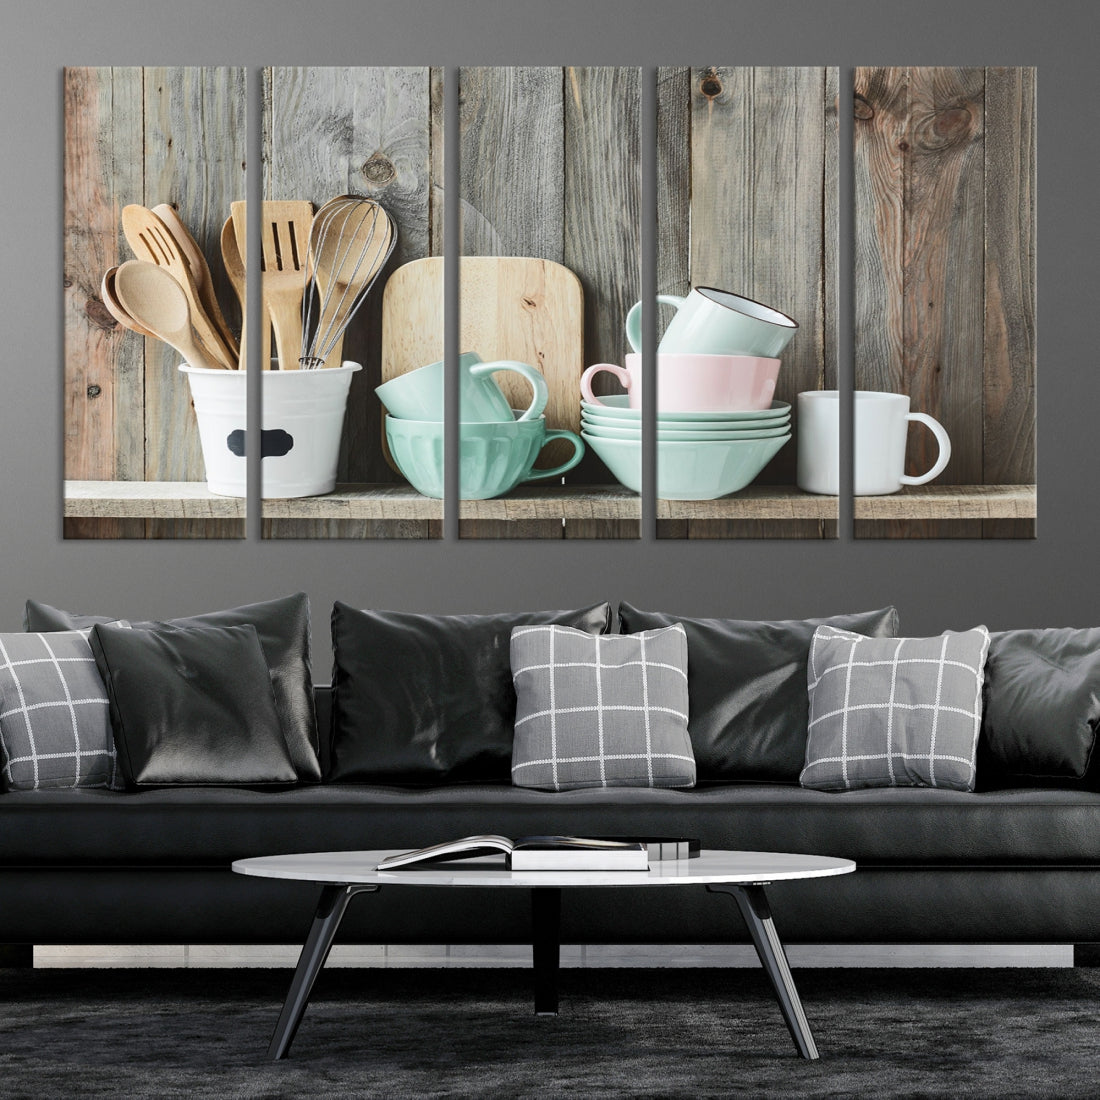 Kitchenware on Rustic Woods Extra Large Canvas Wall Art Kitchen Tools Cooking Art Canvas Print Framed Ready to Hang